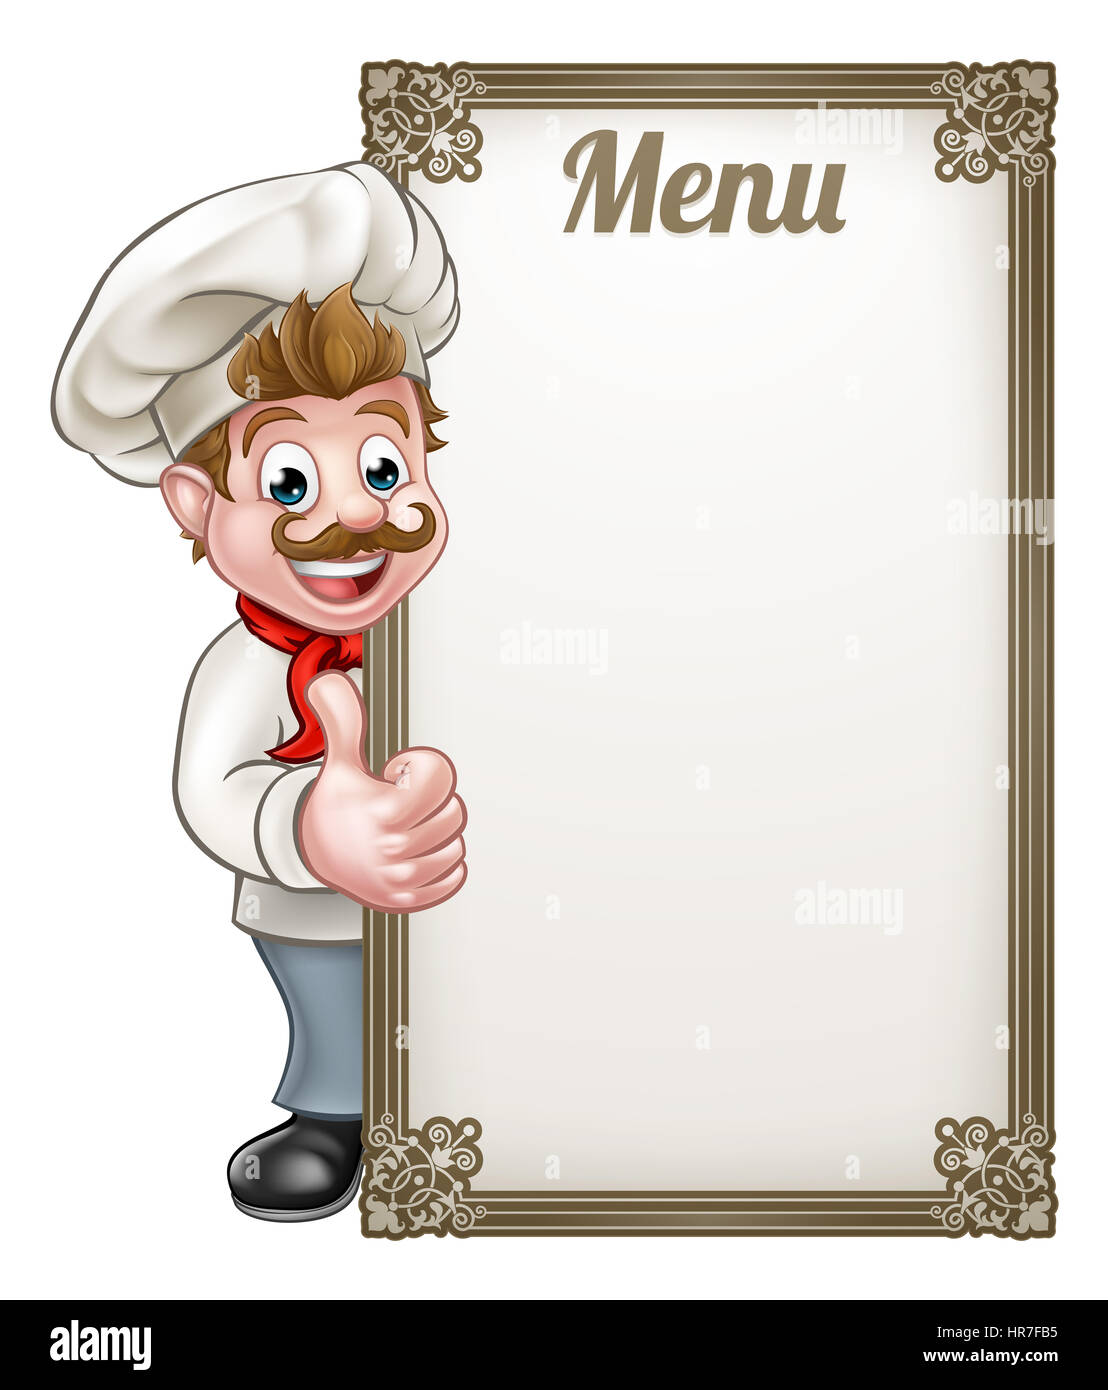 Cartoon chef or baker character giving thumbs up with menu sign board Stock Photo